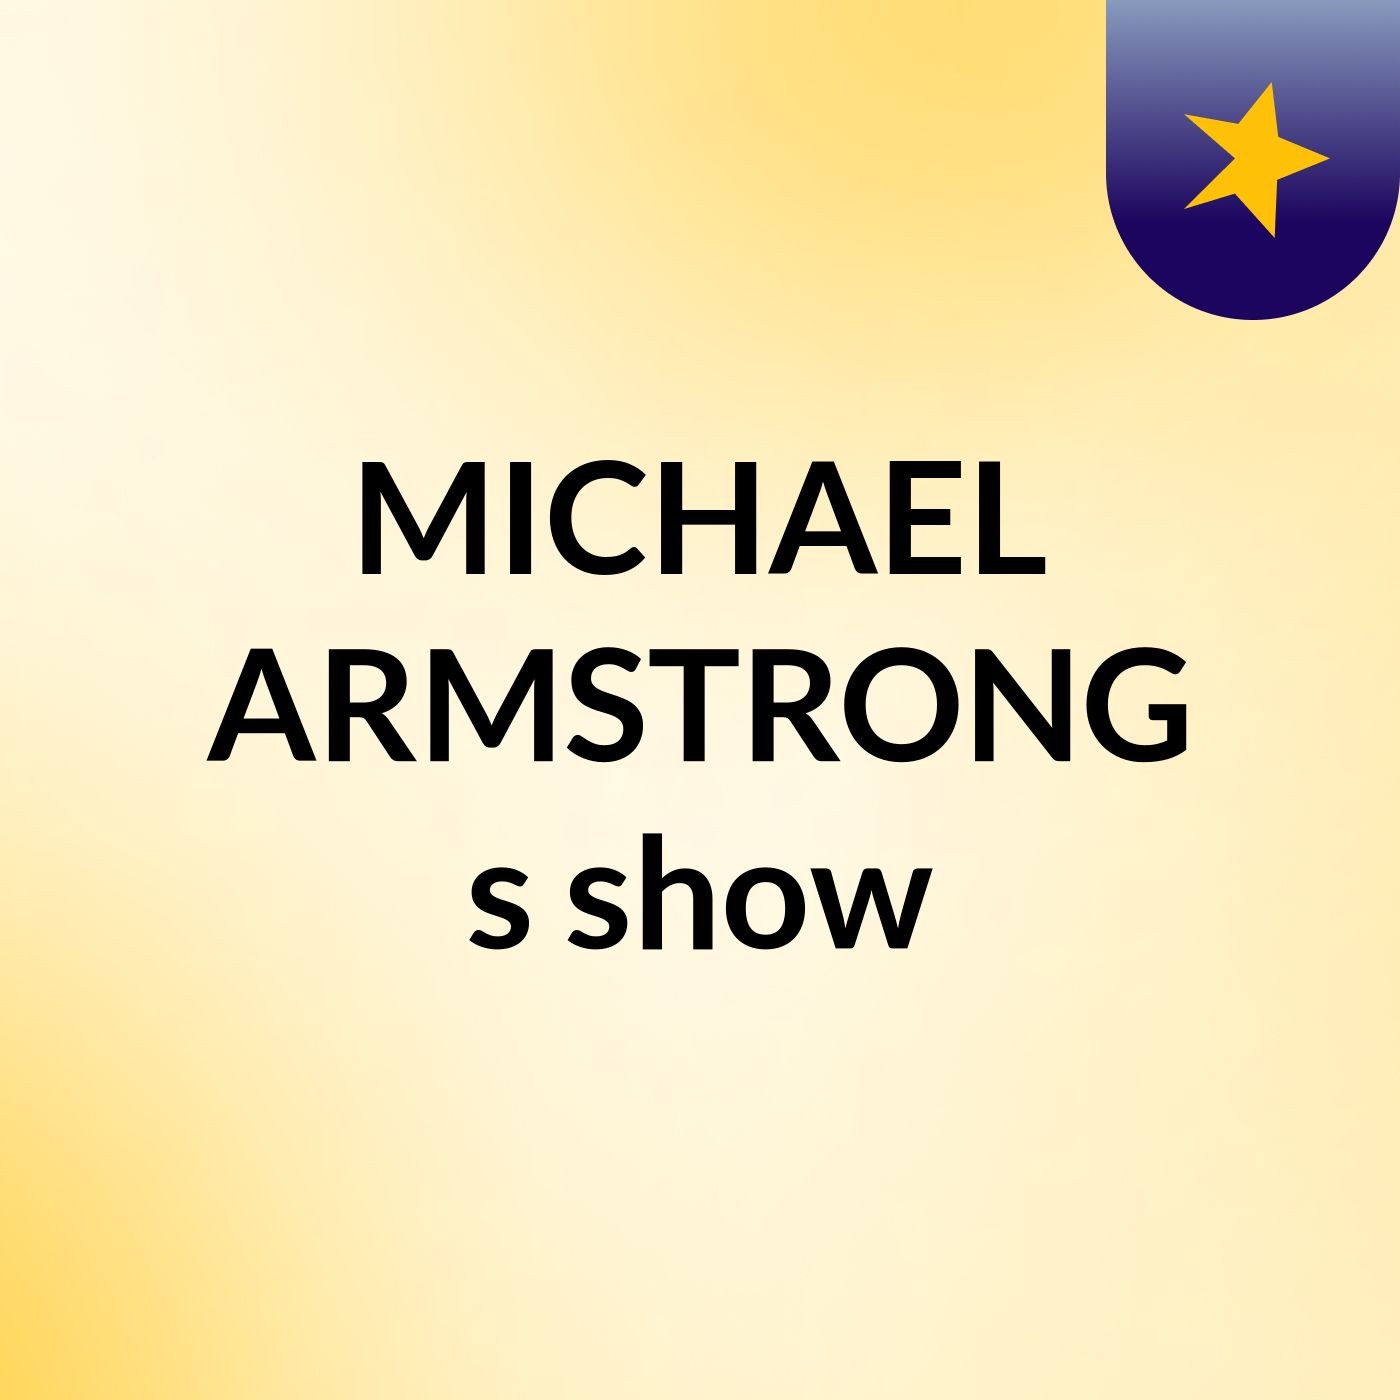 MICHAEL ARMSTRONG's show